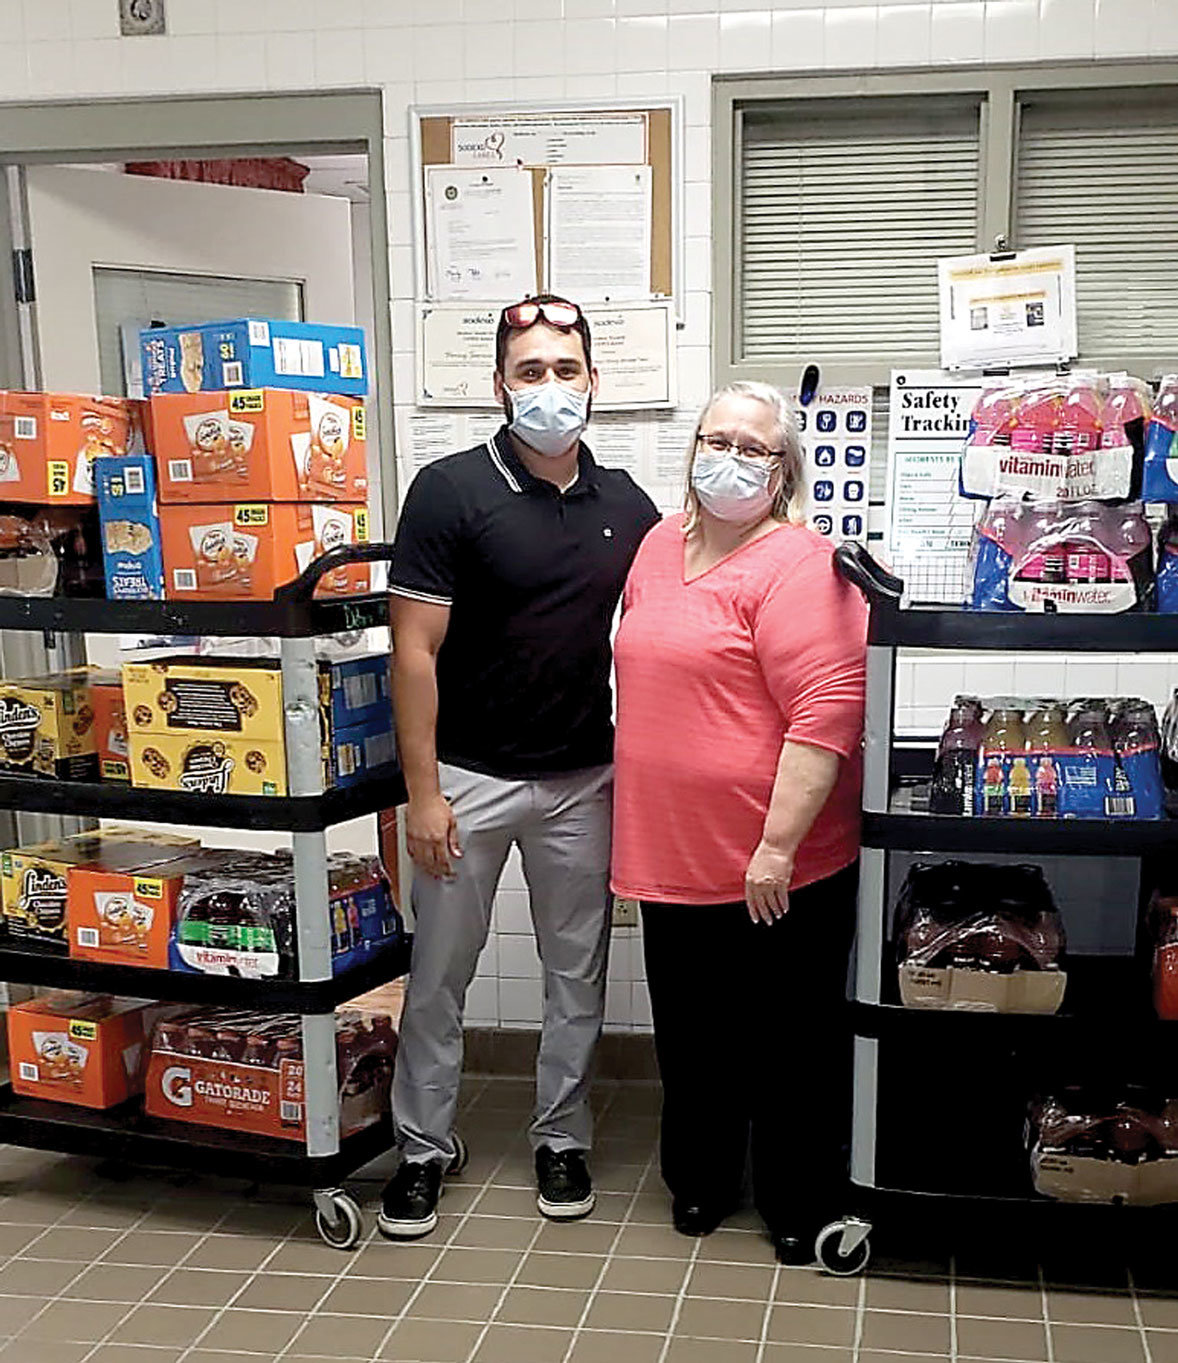 Greater BucksMont Chamber of Commerce Y2Y member Roman Chiokadze, left, and Judy Breinich, assistant director, dining services, Neshaminy Manor, right, with the donation of snacks and drinks for the staff at Neshaminy Manor.